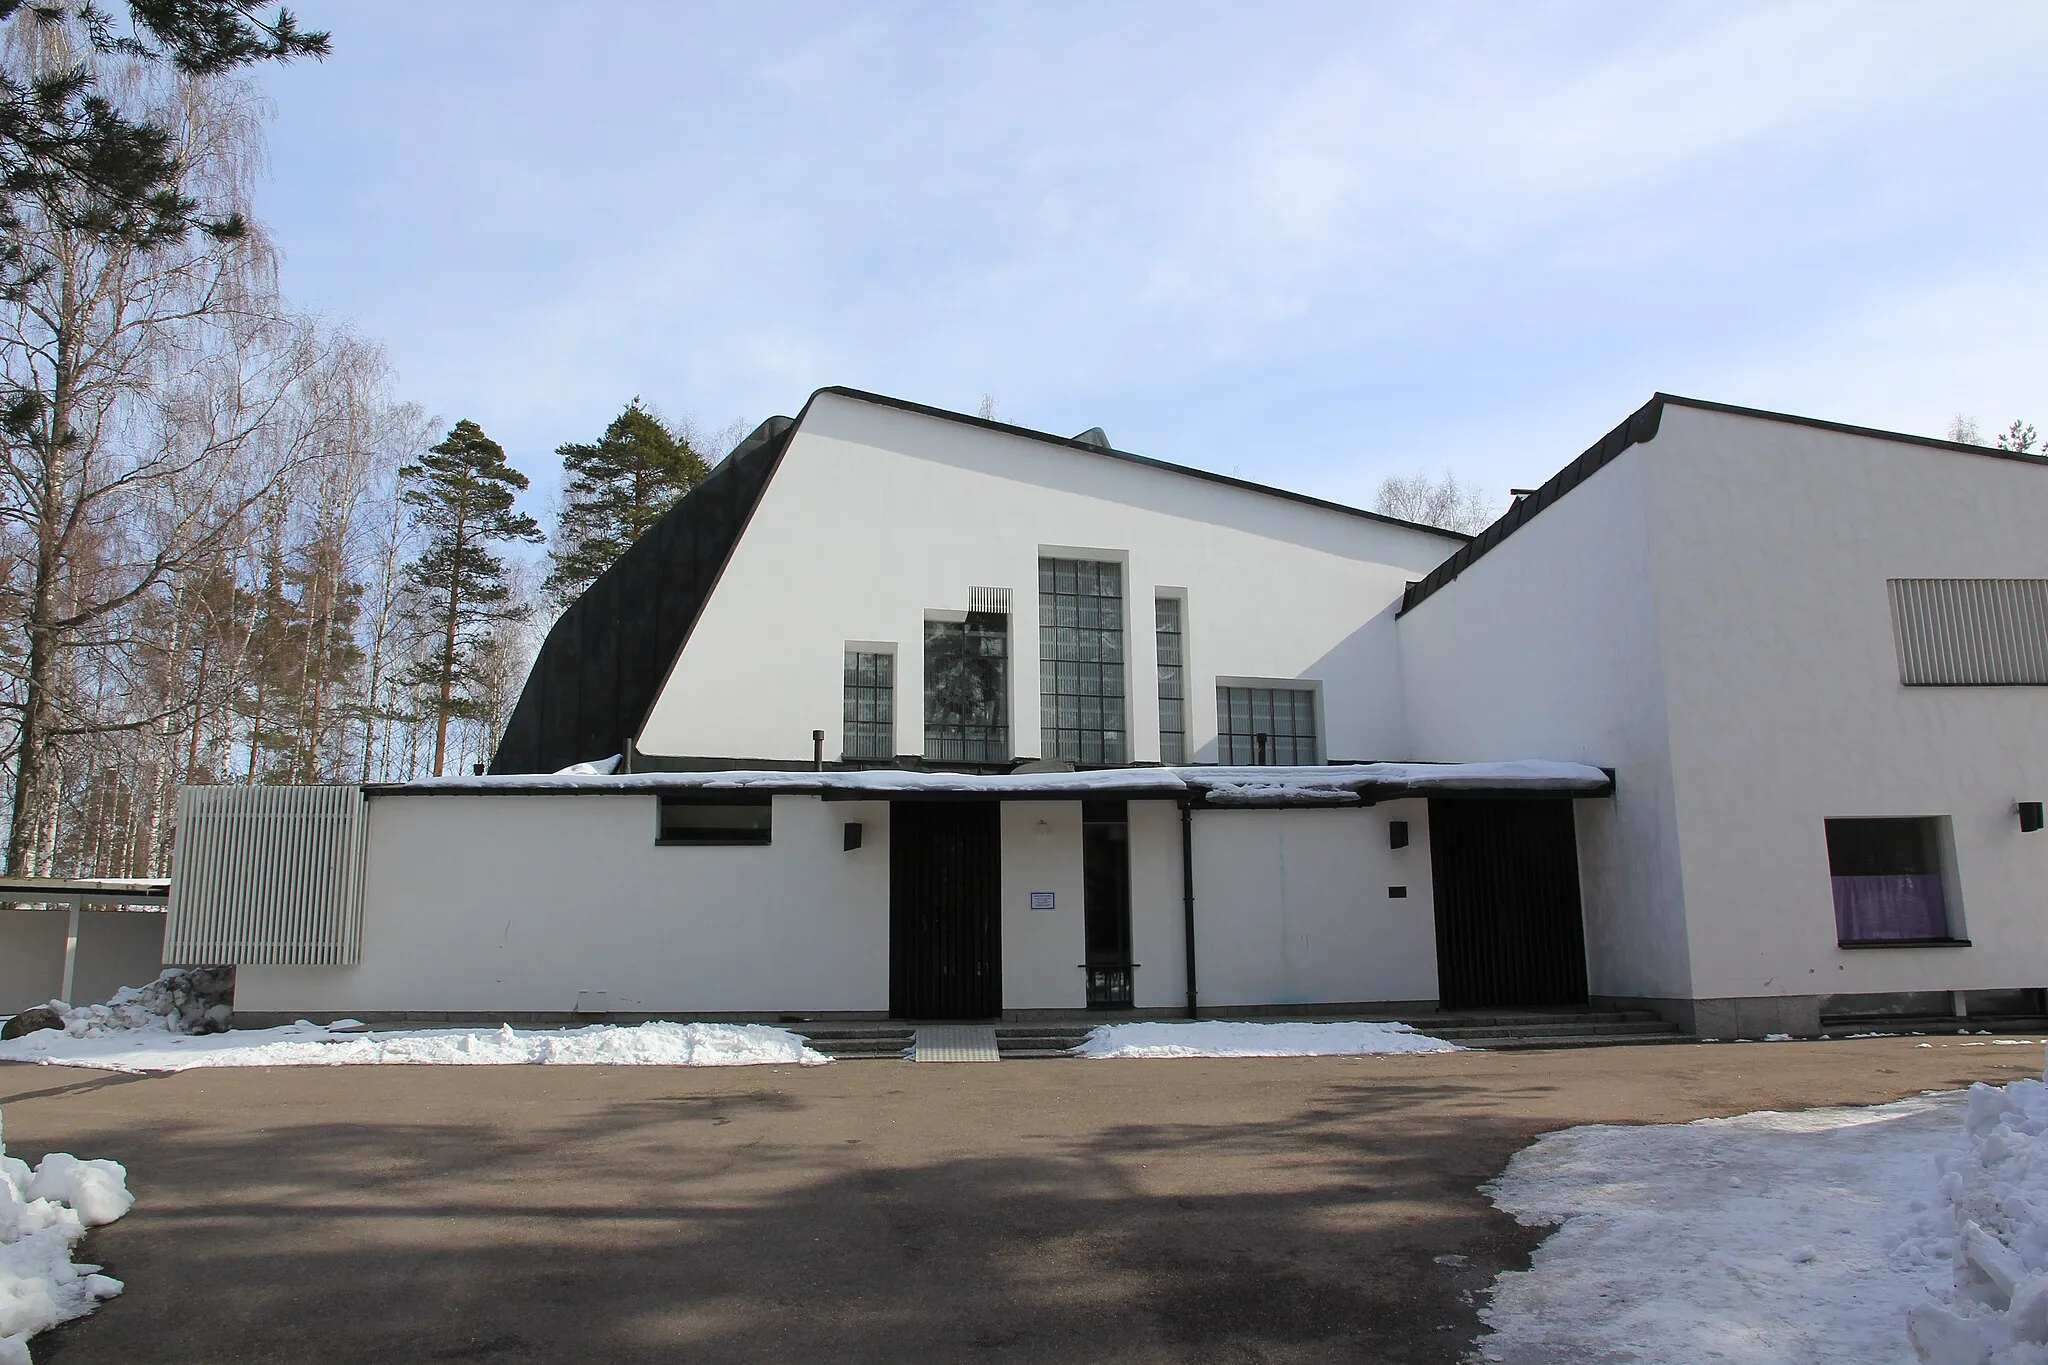 Photo showing: The Church of the three crosses in Imatra.